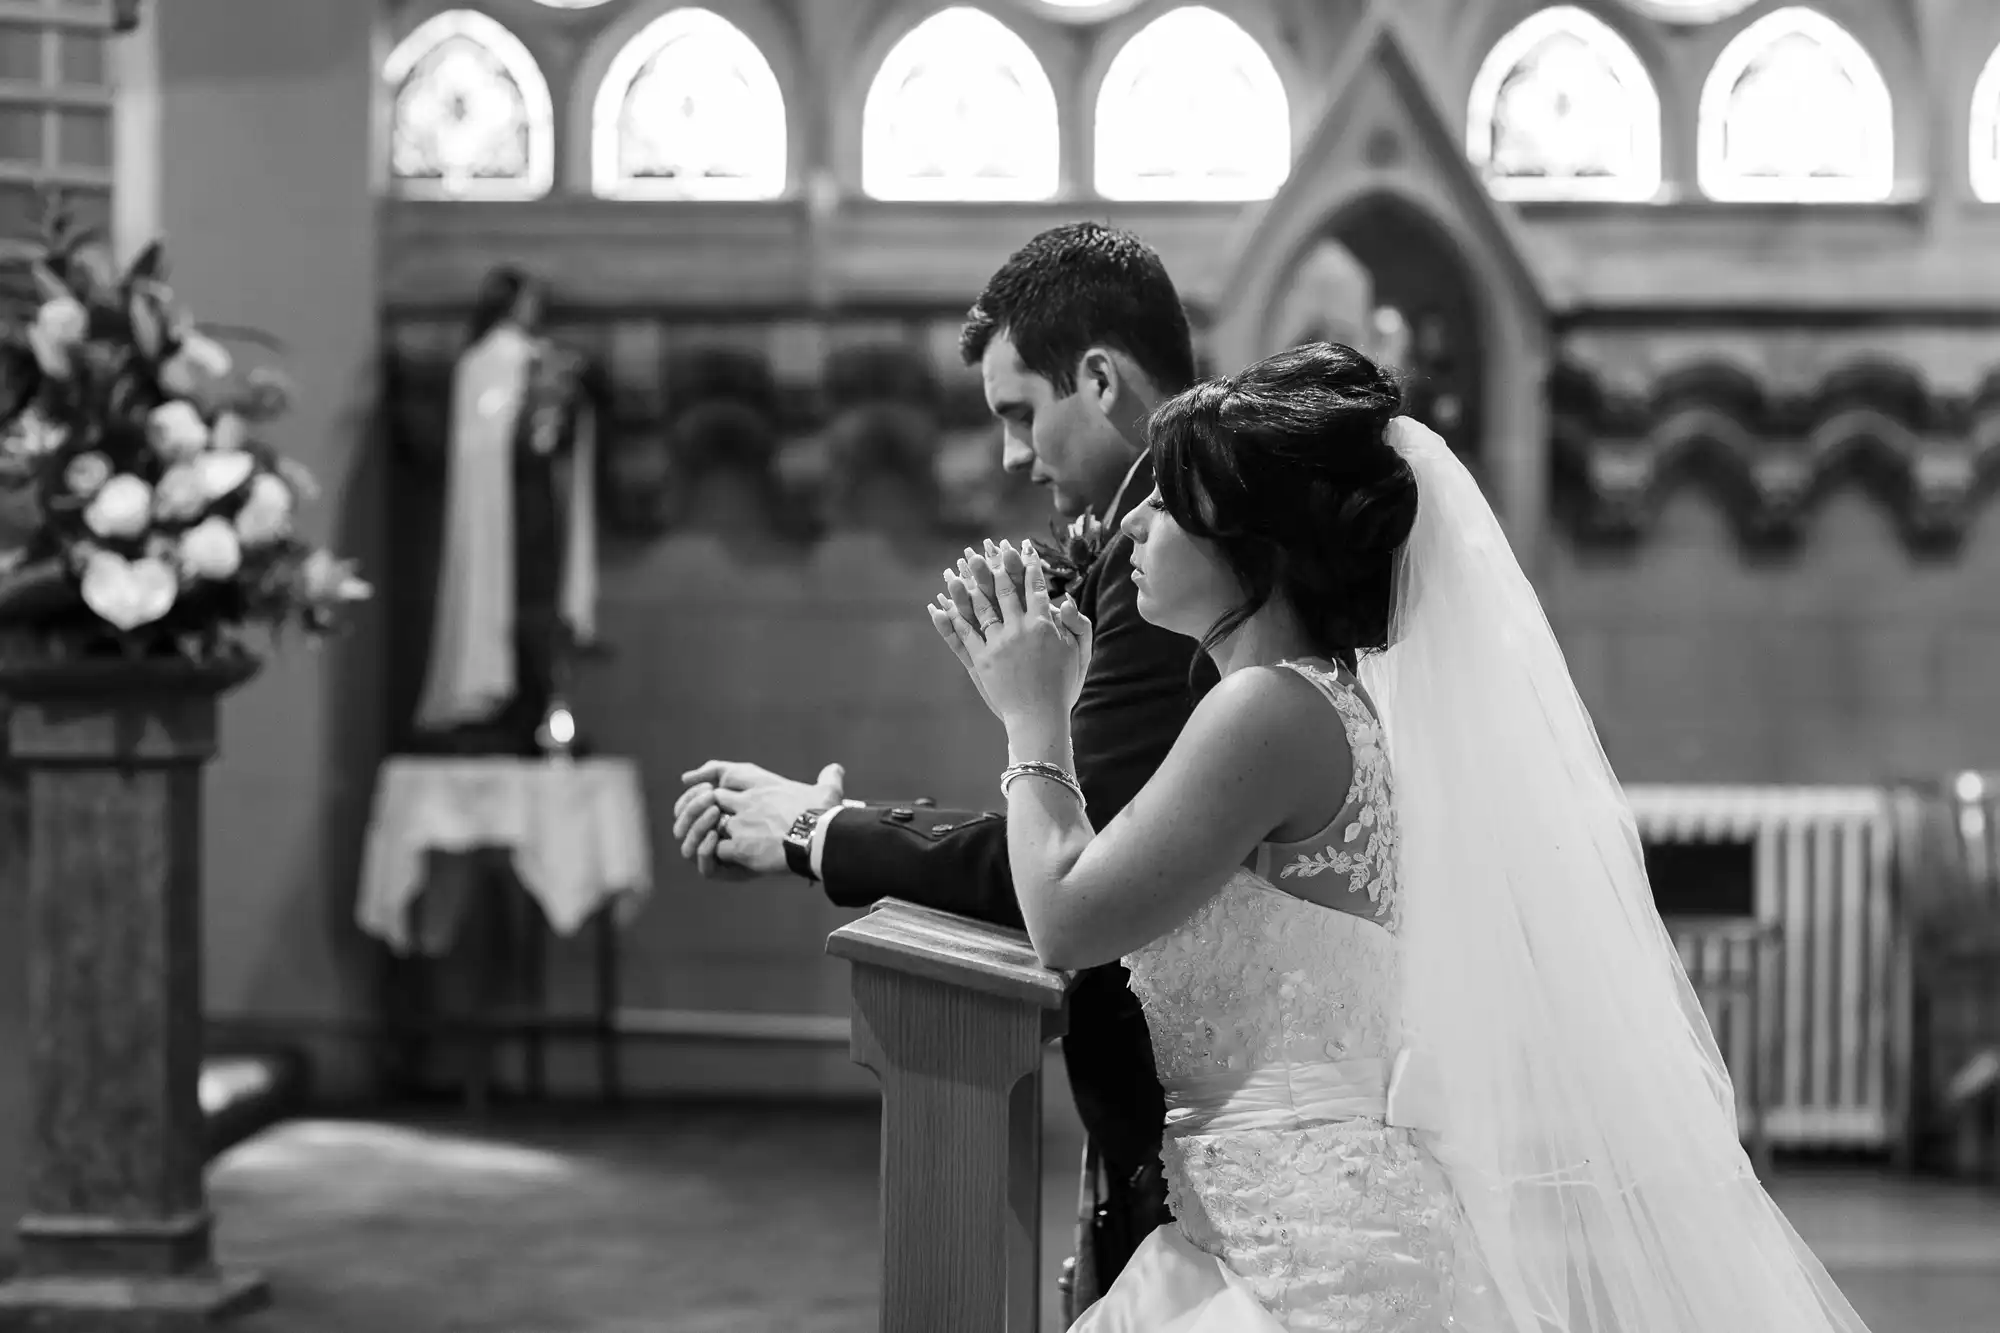 A bride and groom praying at the altar in a church, captured in black and white.